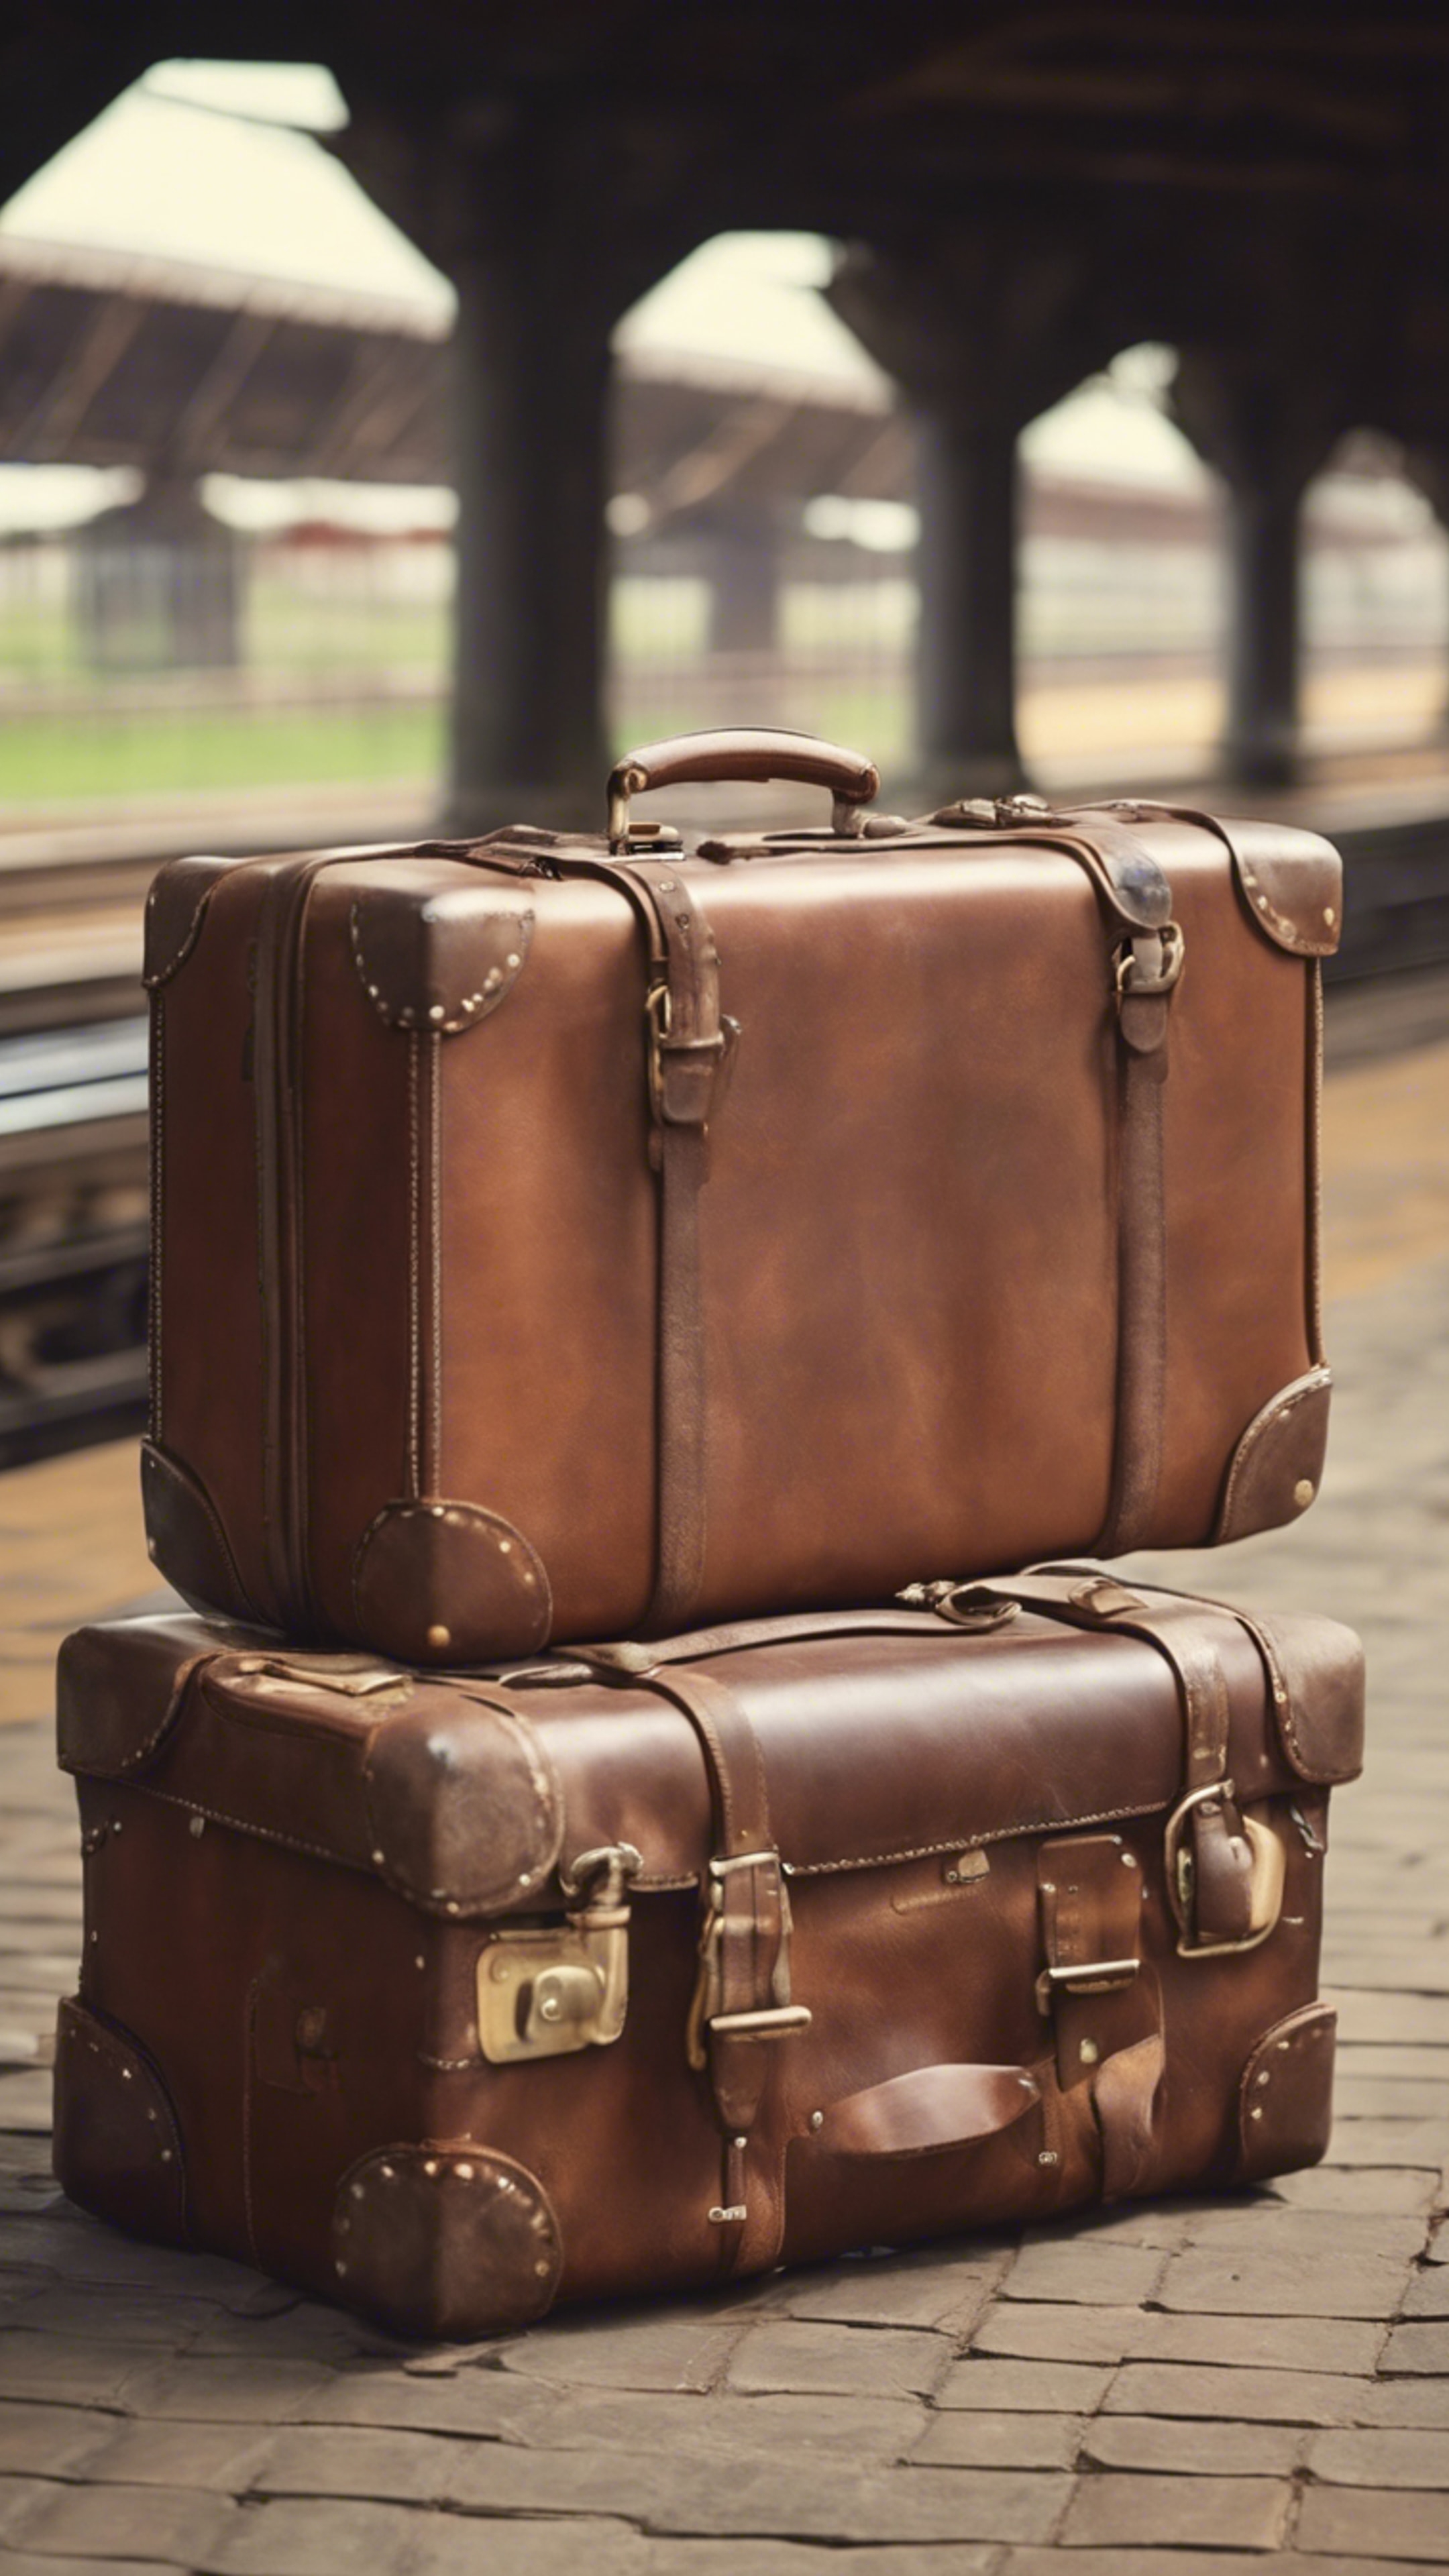 A rustic brown leather suitcase with travel tags, sitting at a quaint railway station.壁紙[6b7e956de06740cdbd0e]